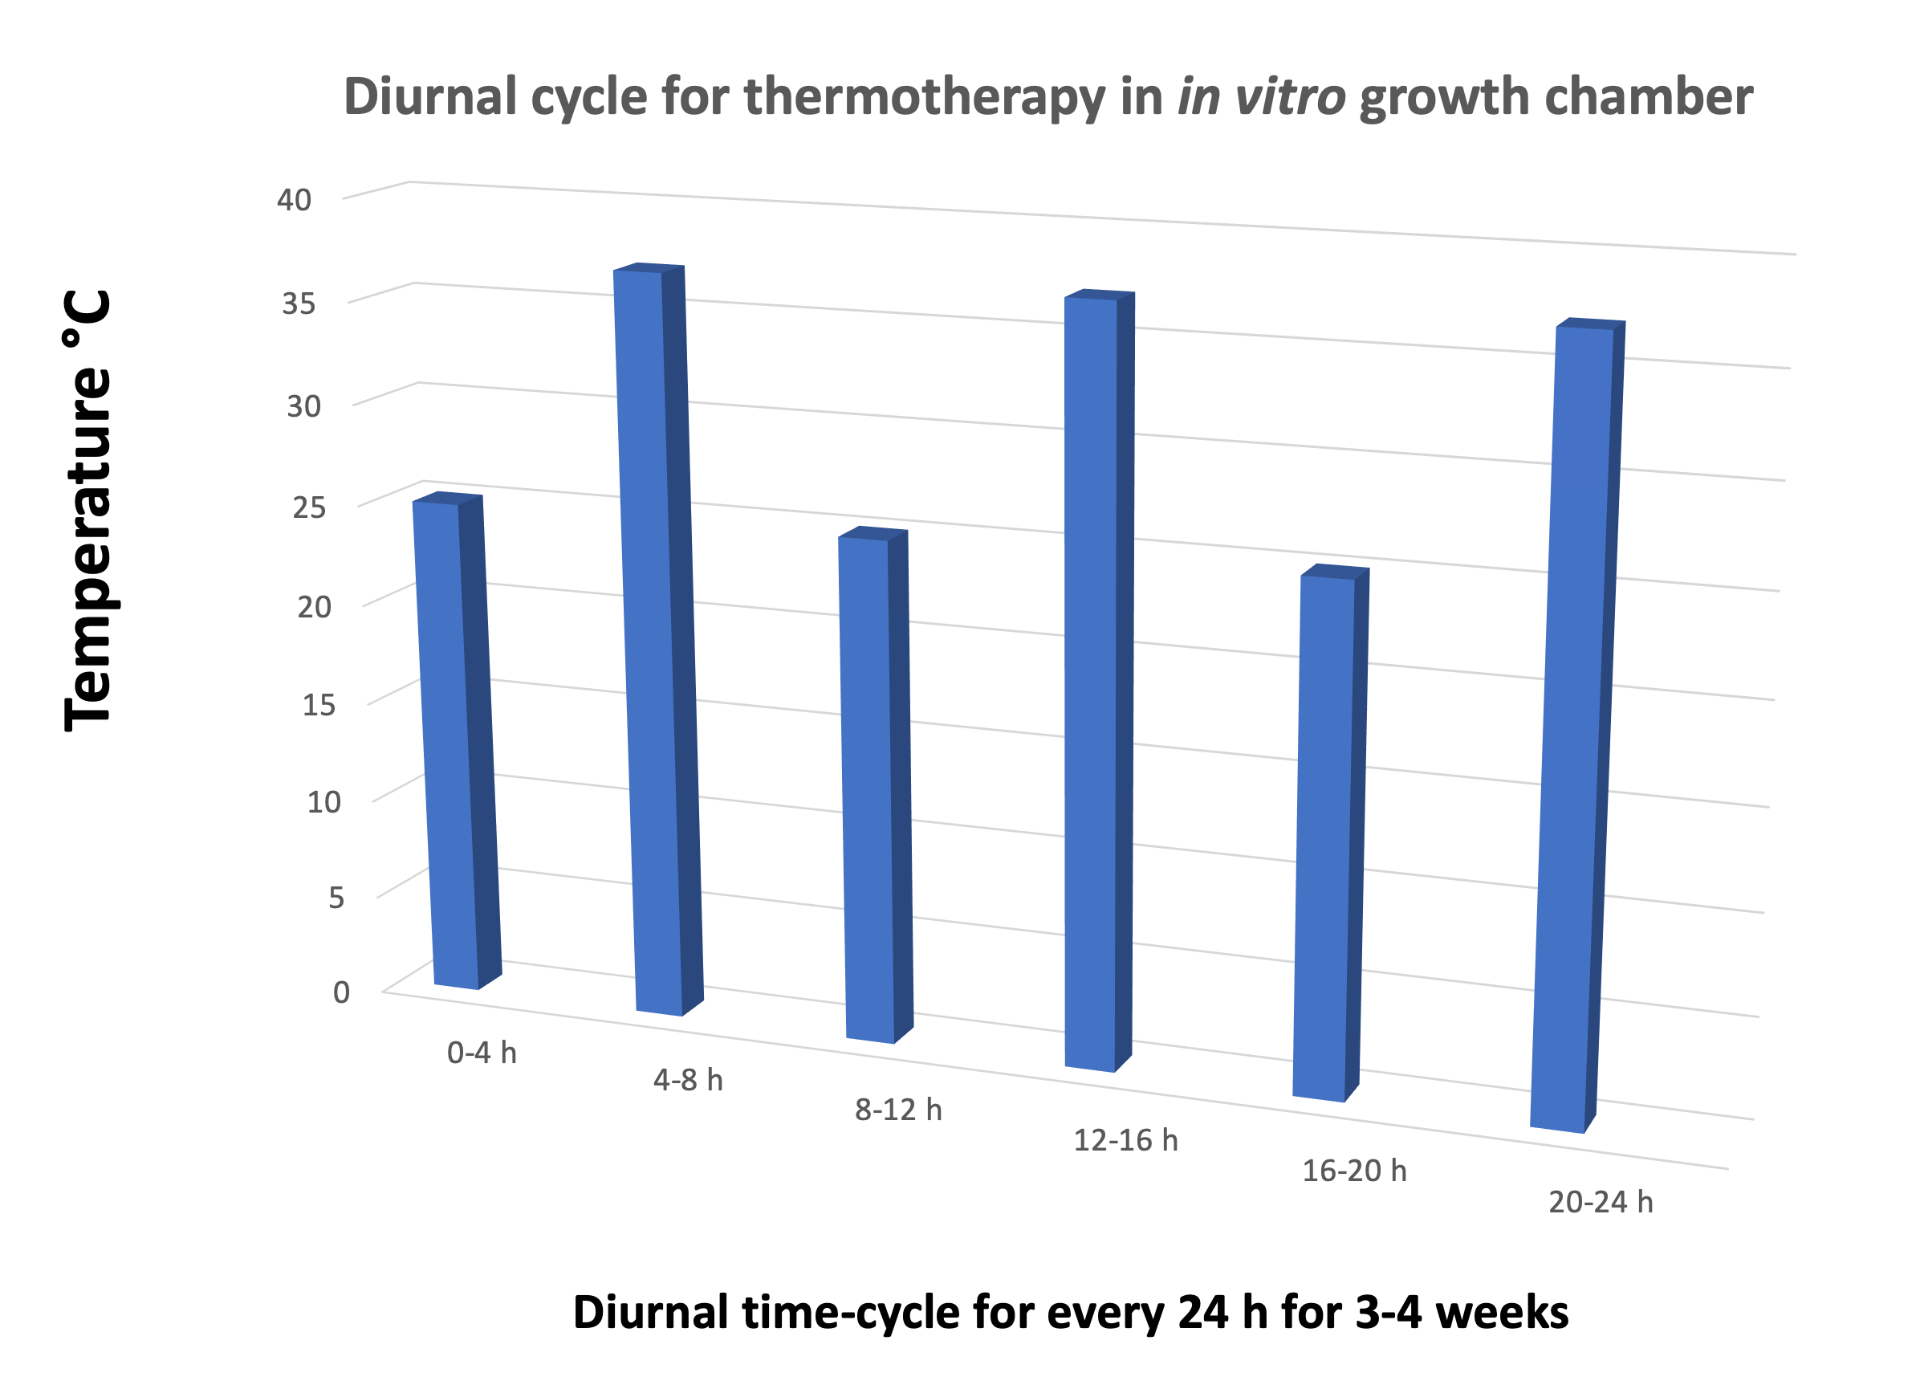 Diurnal time-cycle for every 24 h for 3-4 weeks